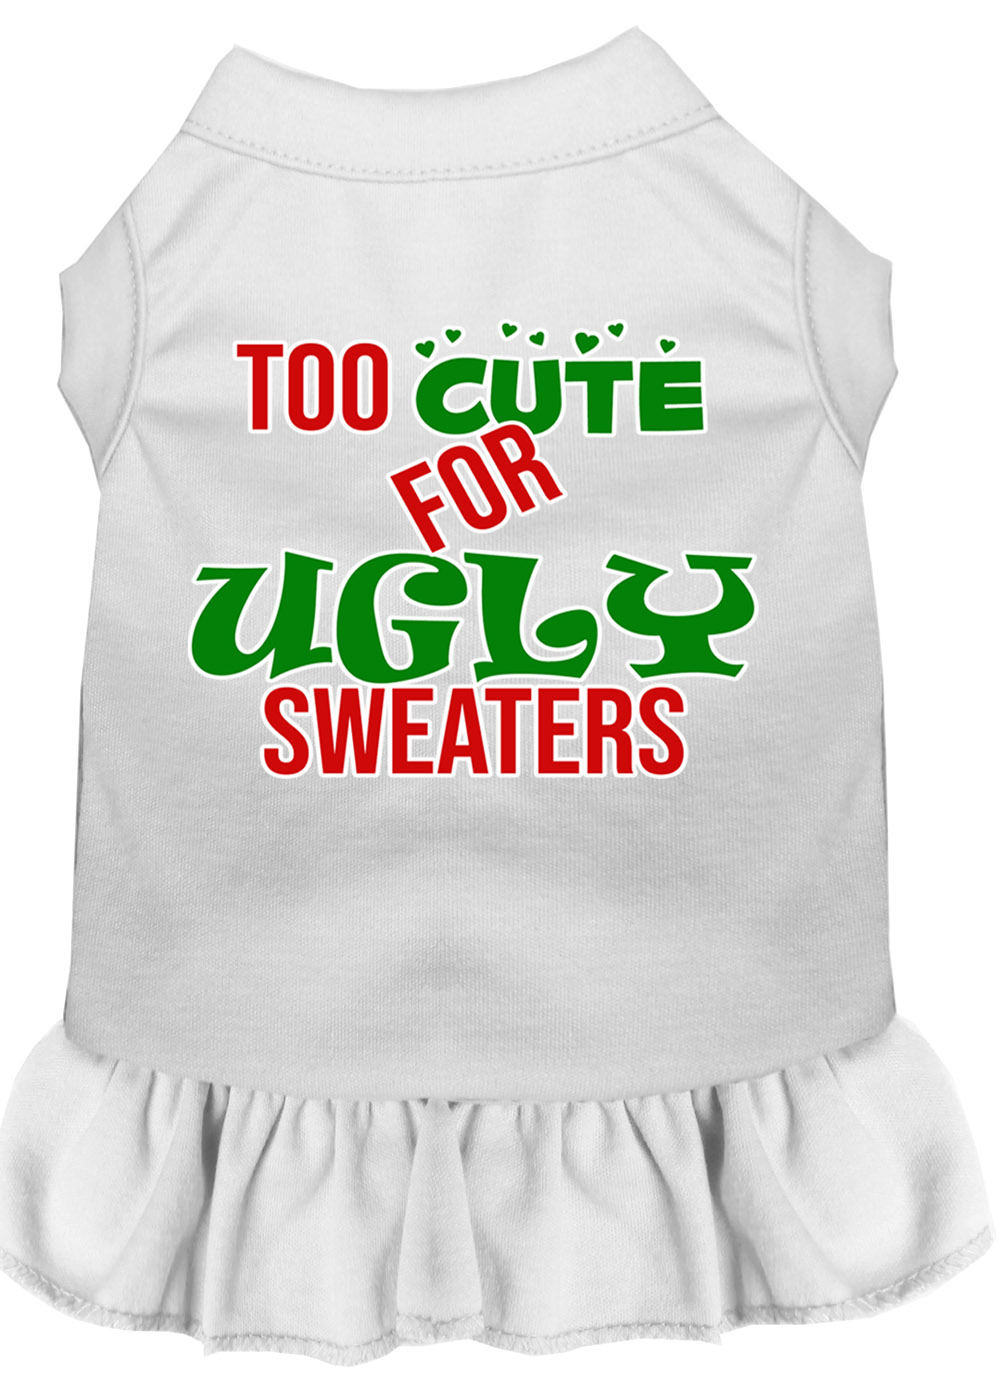 Too Cute for Ugly Sweaters Screen Print Dog Dress White Med